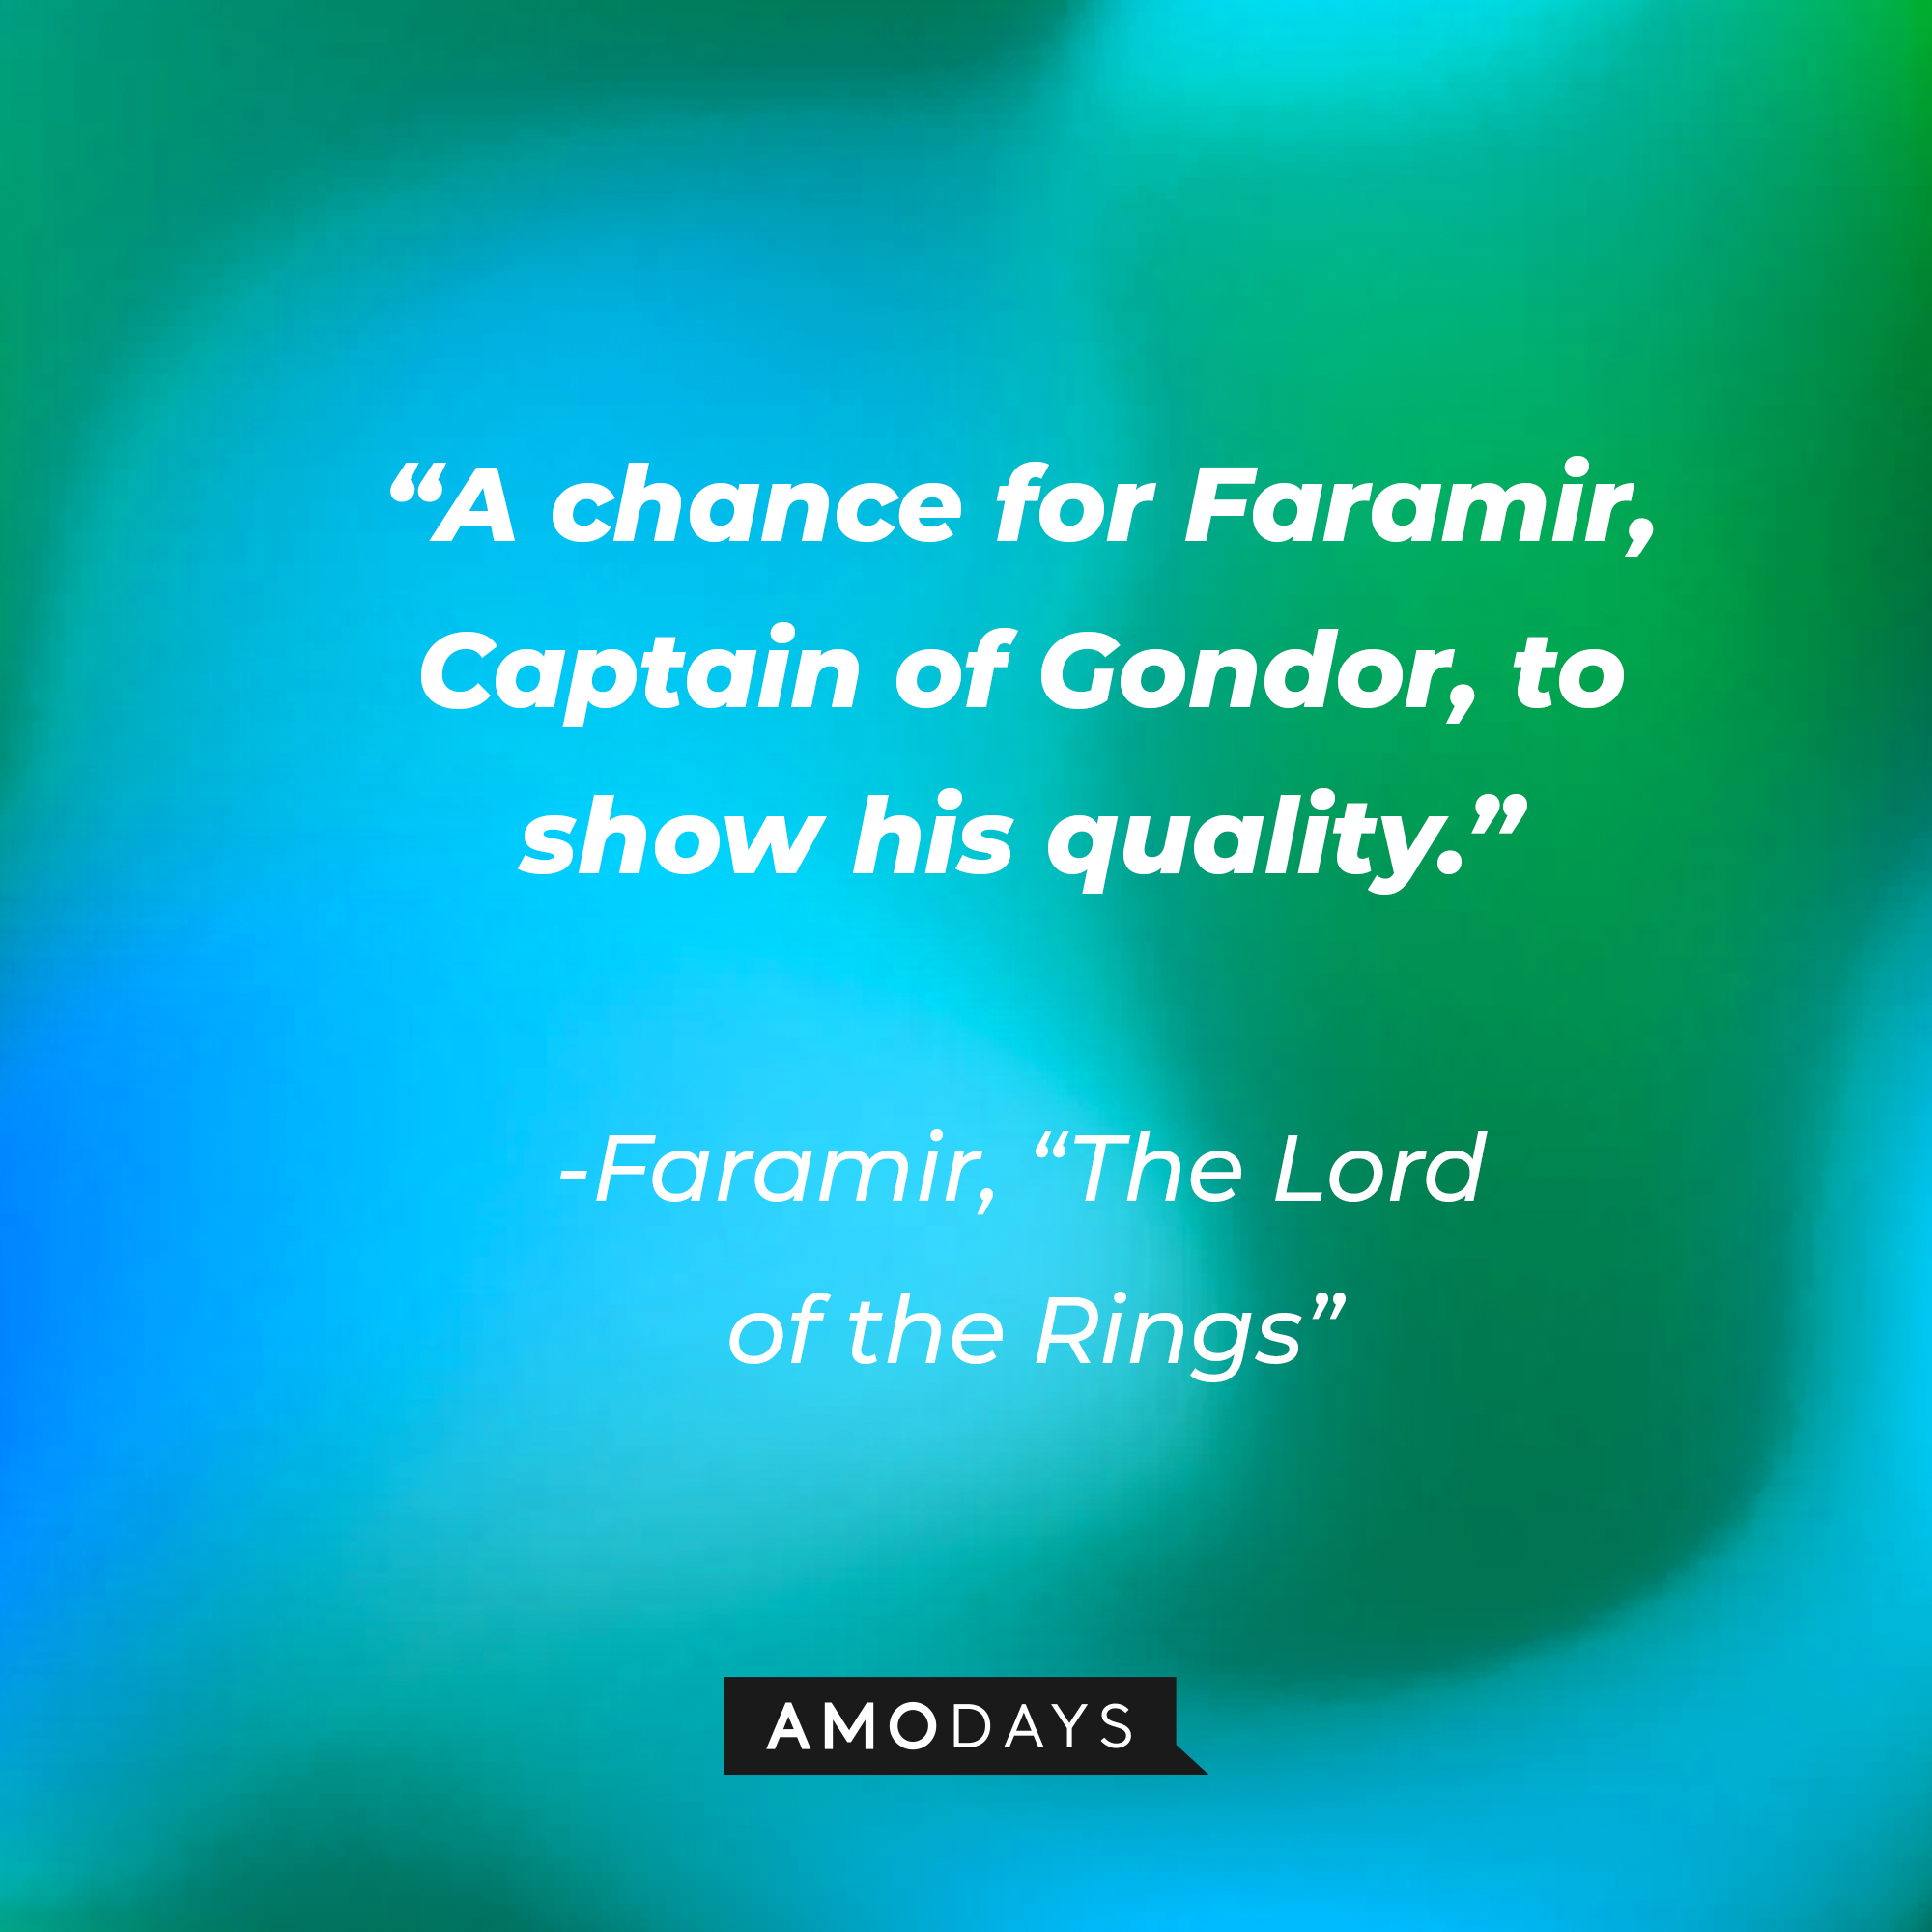 Faramir's quote from "The Lord of the Rings": "A chance for Faramir, Captain of Gondor, to show his quality." | Source: AmoDays